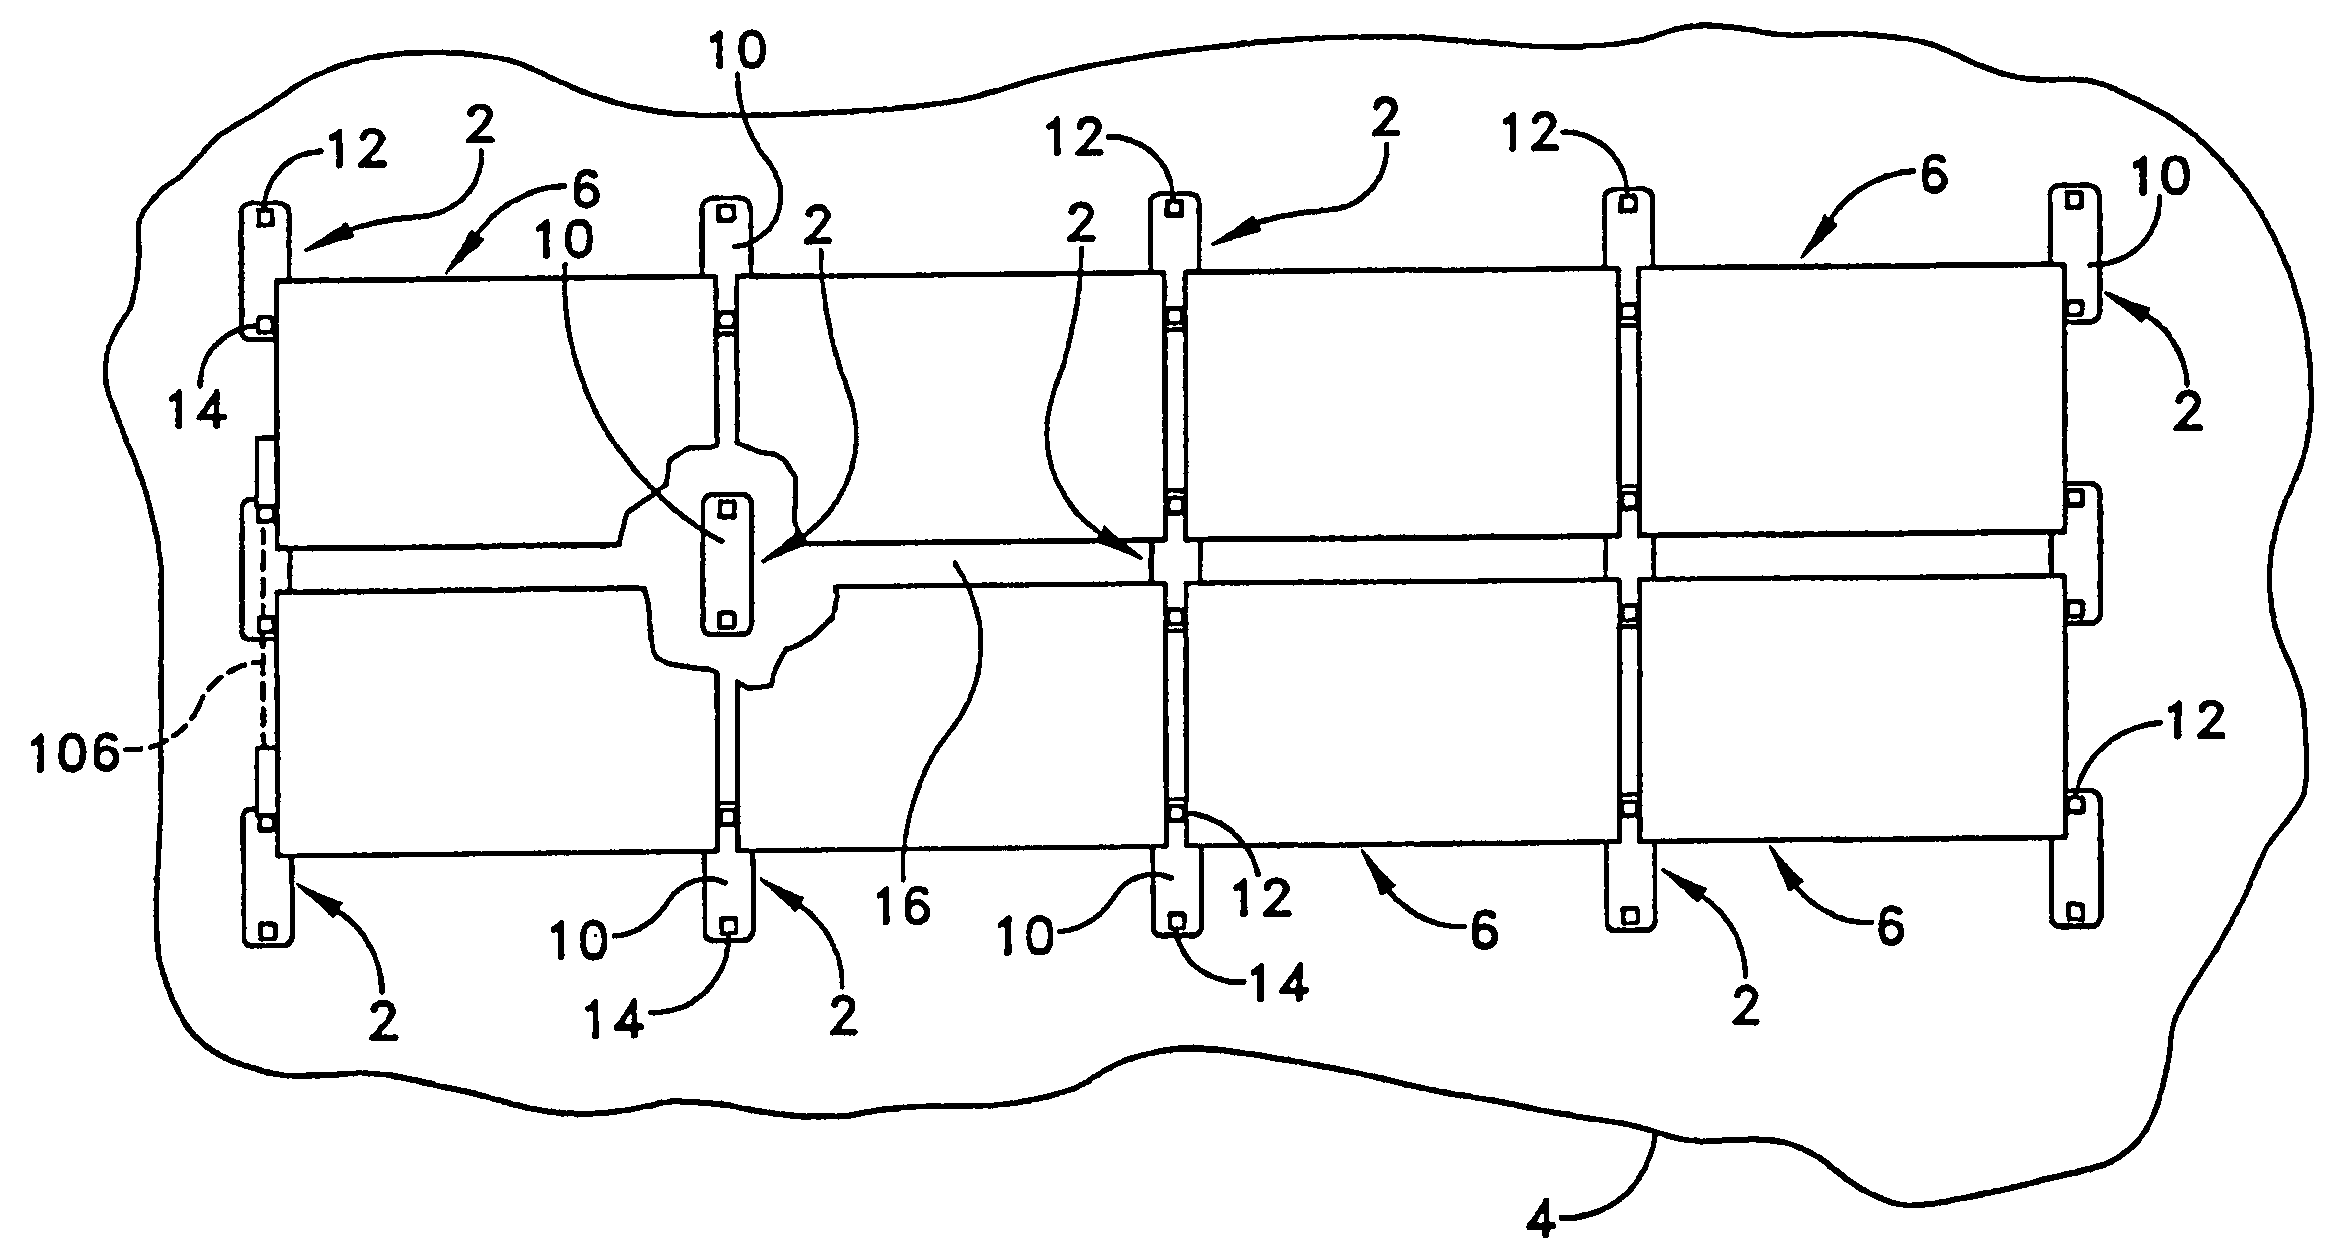 Apparatus for mounting photovoltaic power generating systems on buildings